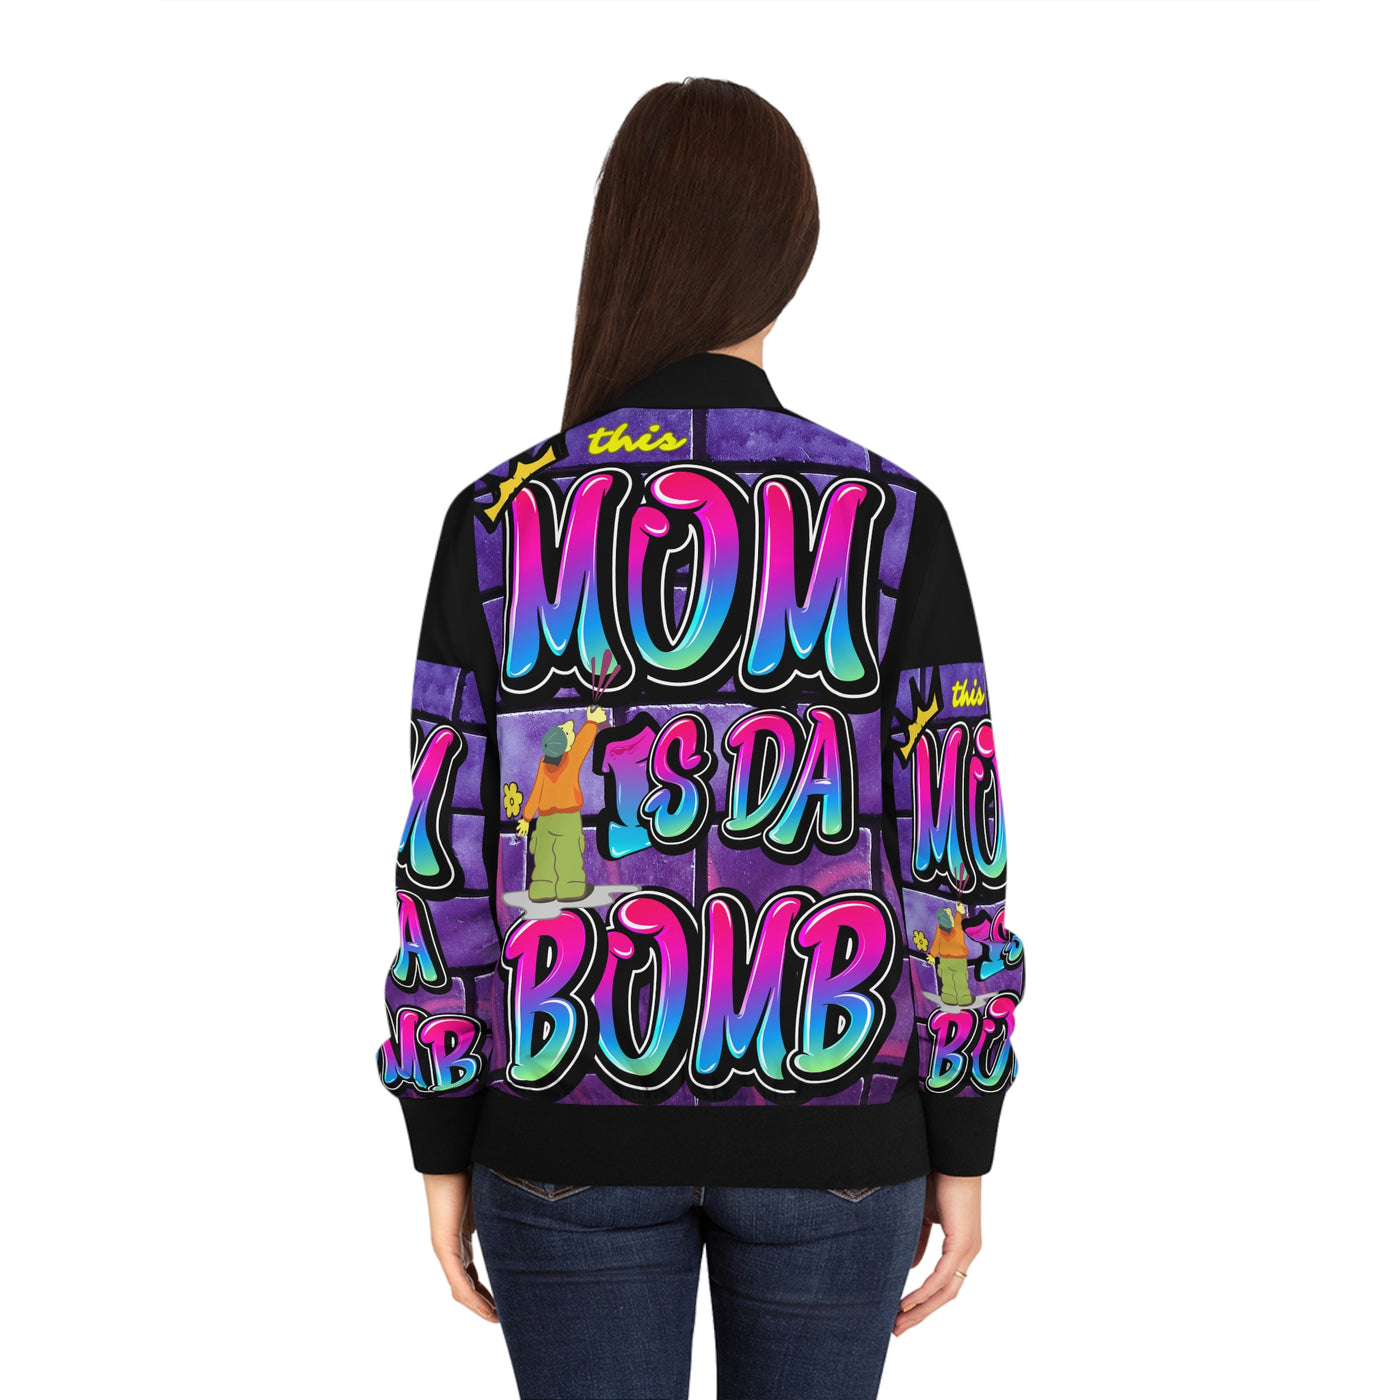 THE BOMB - - MOM (AOP) IS Bomber Black – Rich Women\'s Vibes 90s Jacket Retro THIS